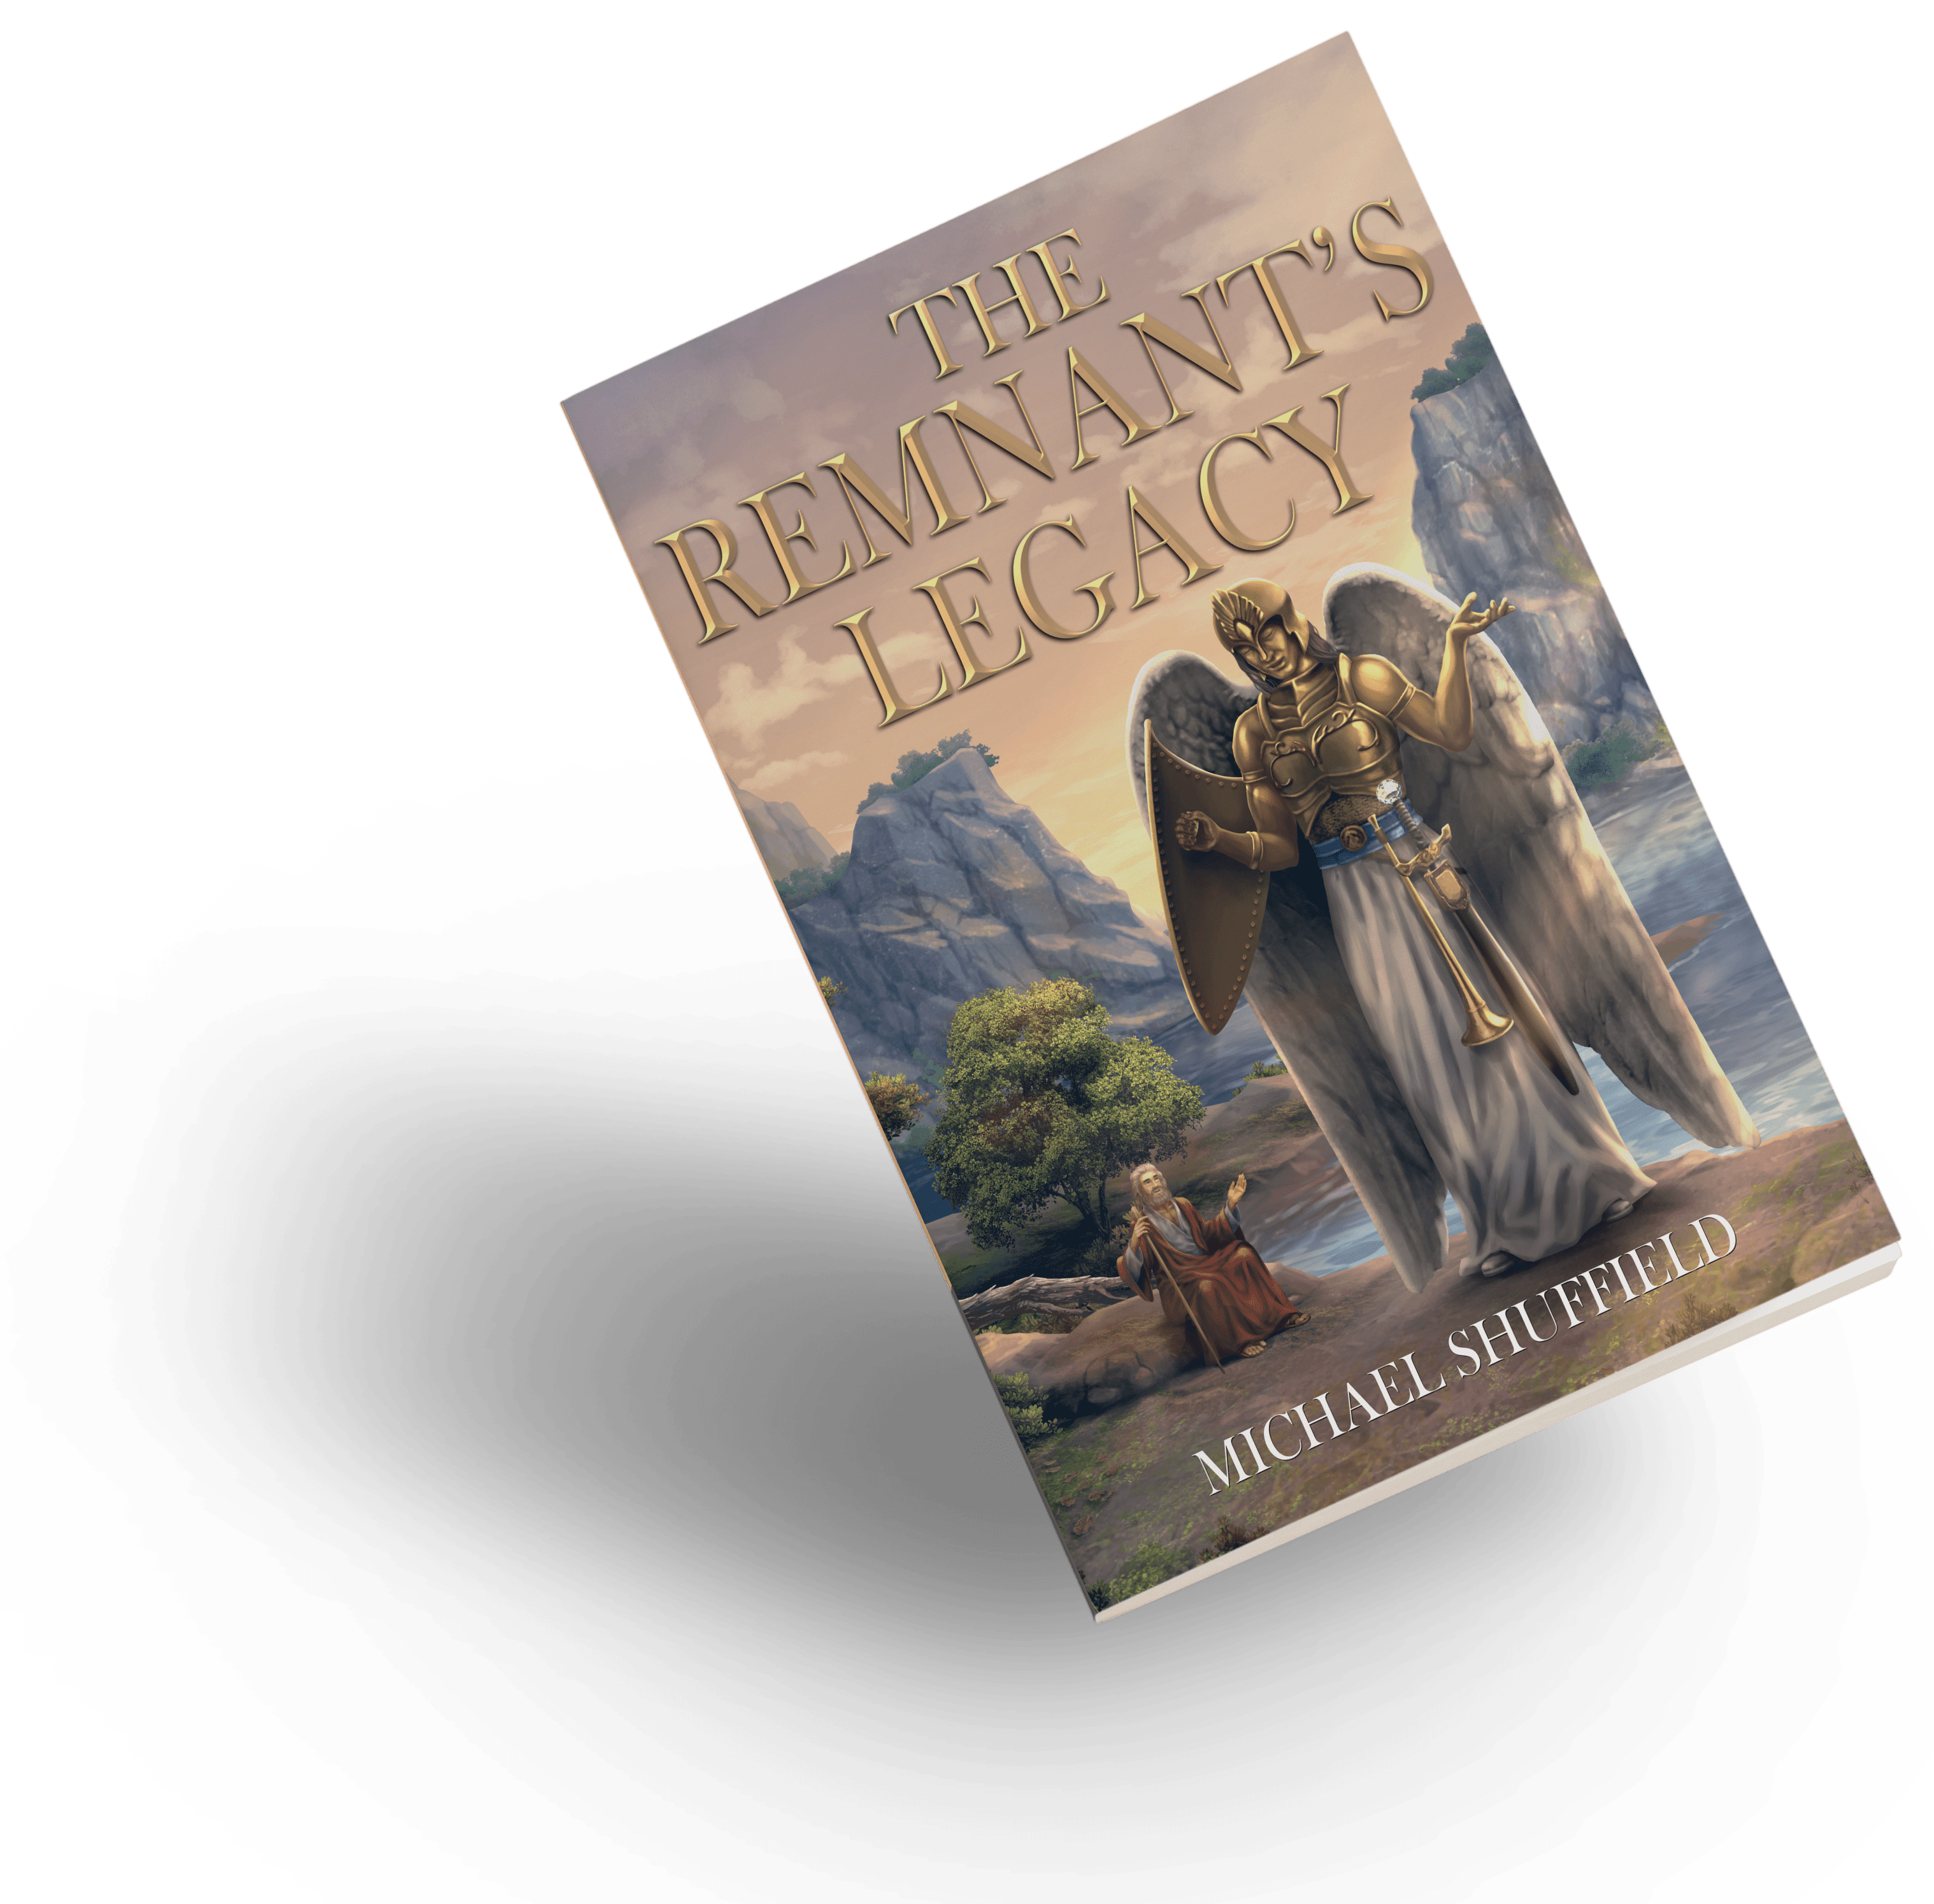 The Remnant's Legacy book